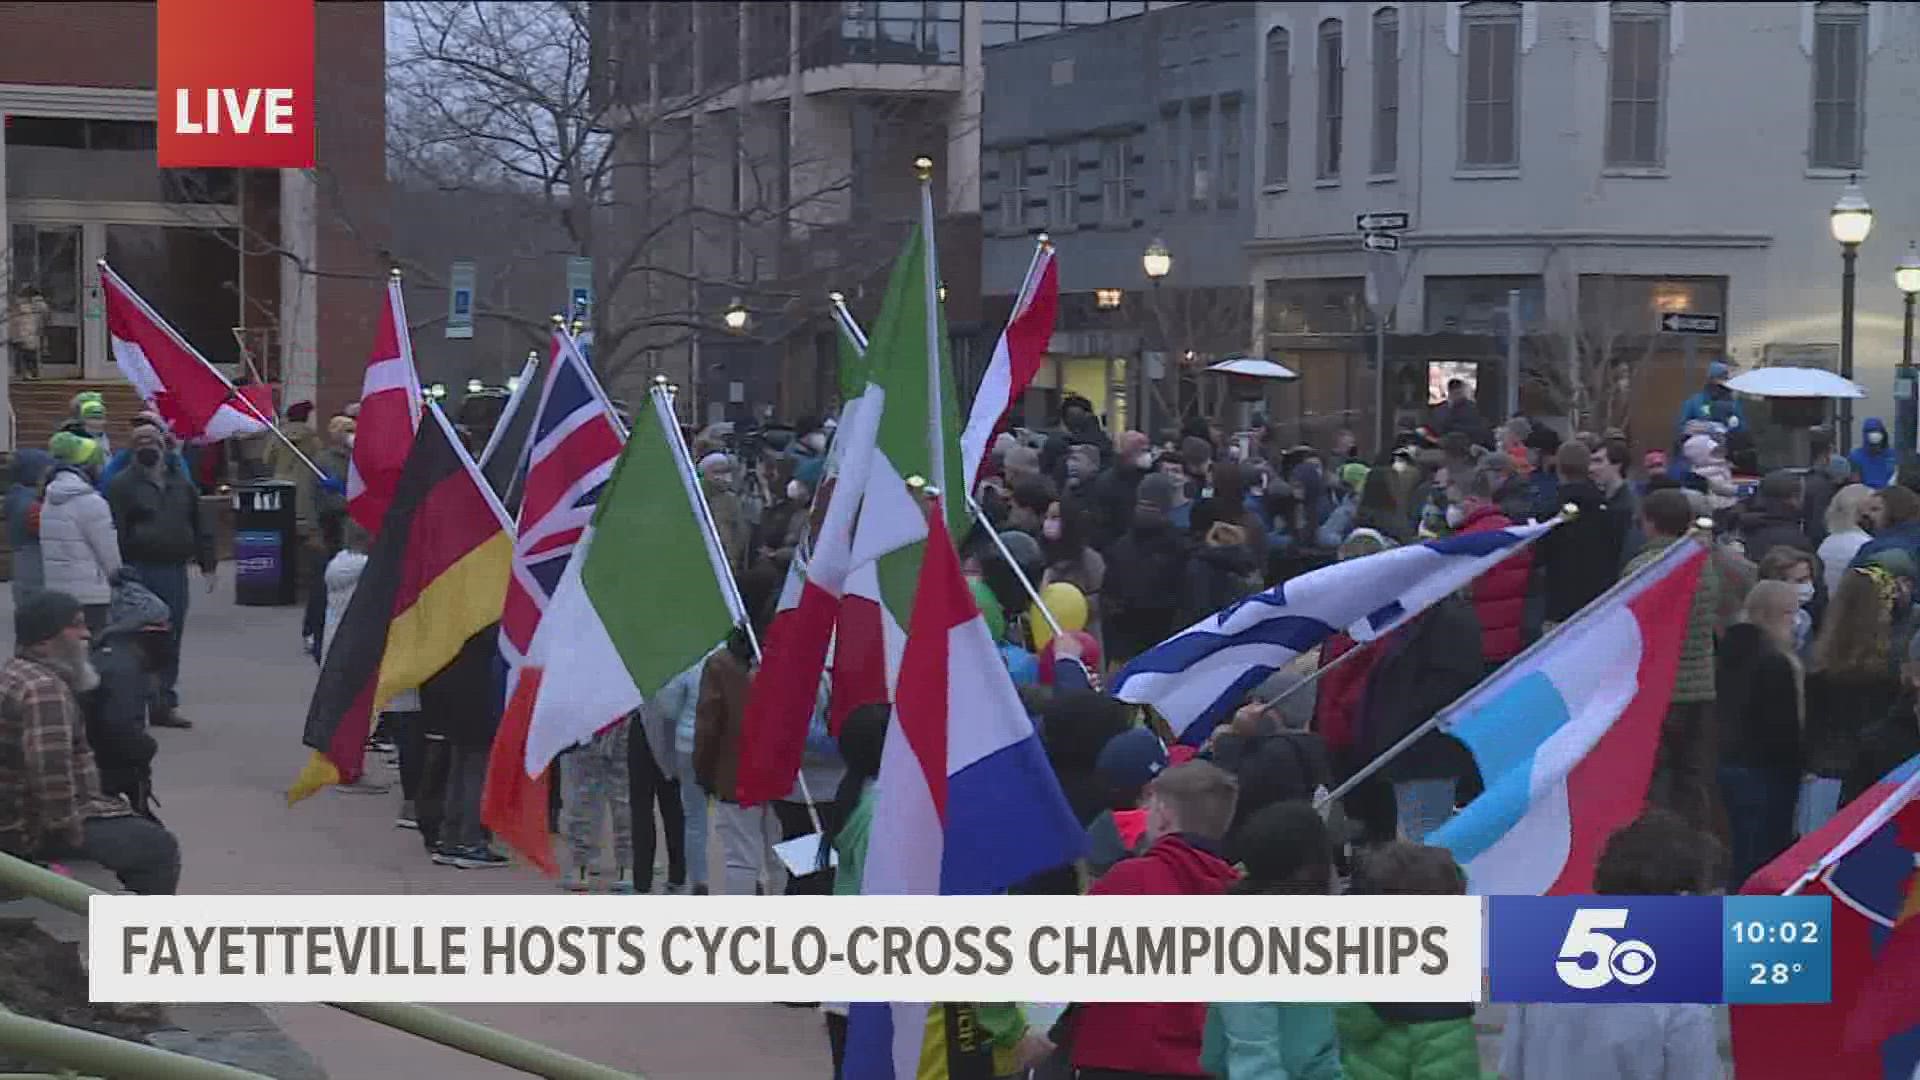 The City of Fayetteville and Northwest Arkansas are expecting 300 athletes, thousands of spectators, and media outlets for the 2022 Cyclo-Cross World Championship.